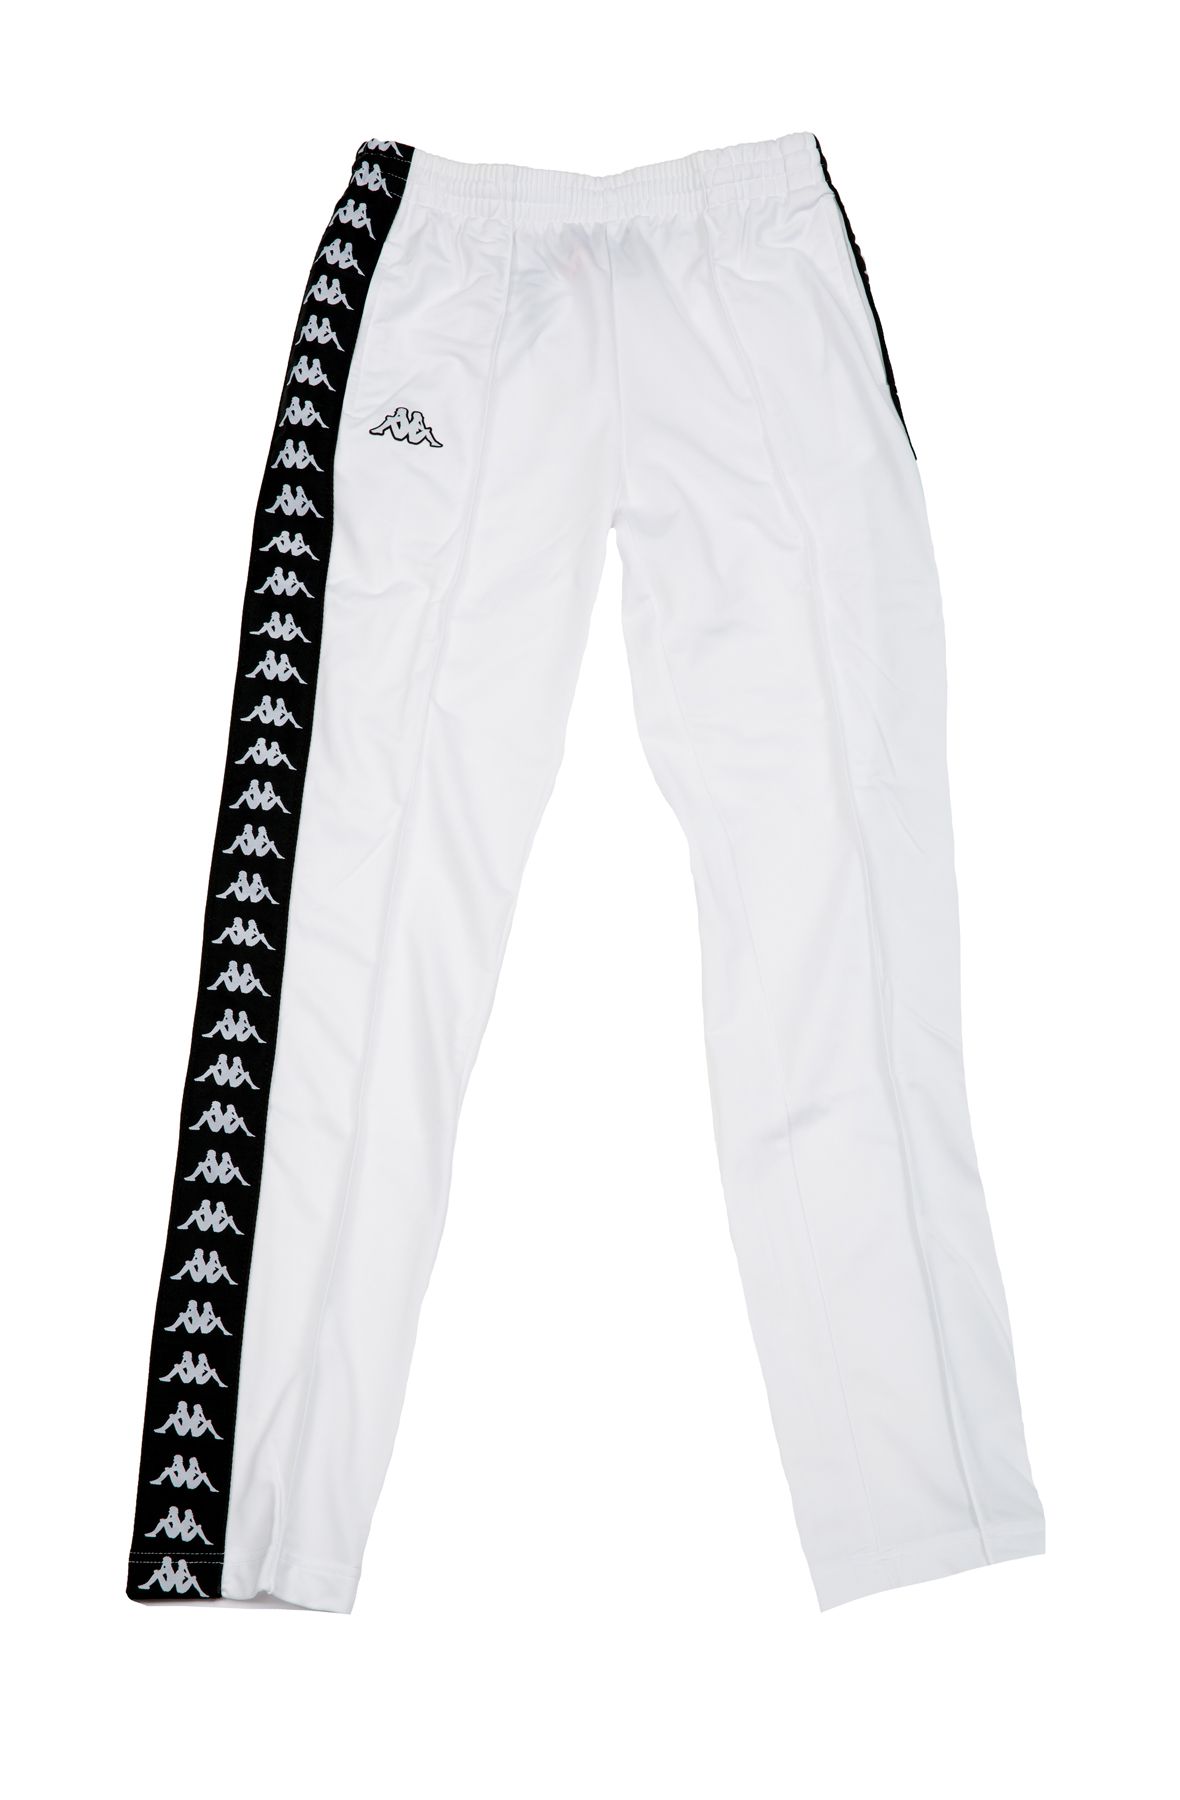 Wholesale Campus Sutra Printed Women White, Black Track Pants – Tradyl